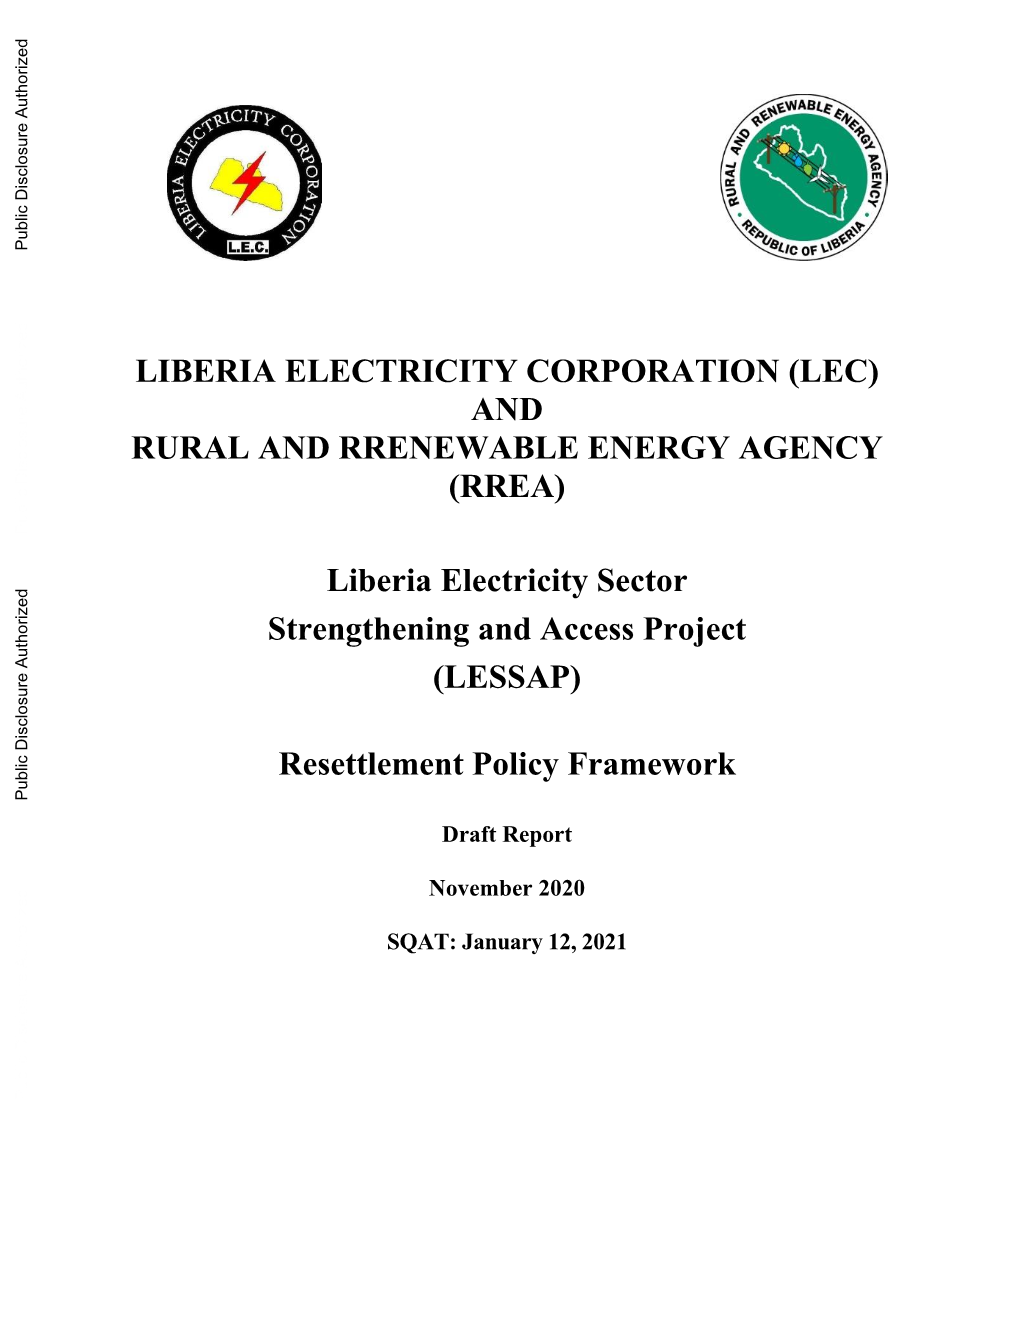 Liberia Electricity Corporation (Lec) and Rural and Rrenewable Energy Agency (Rrea)